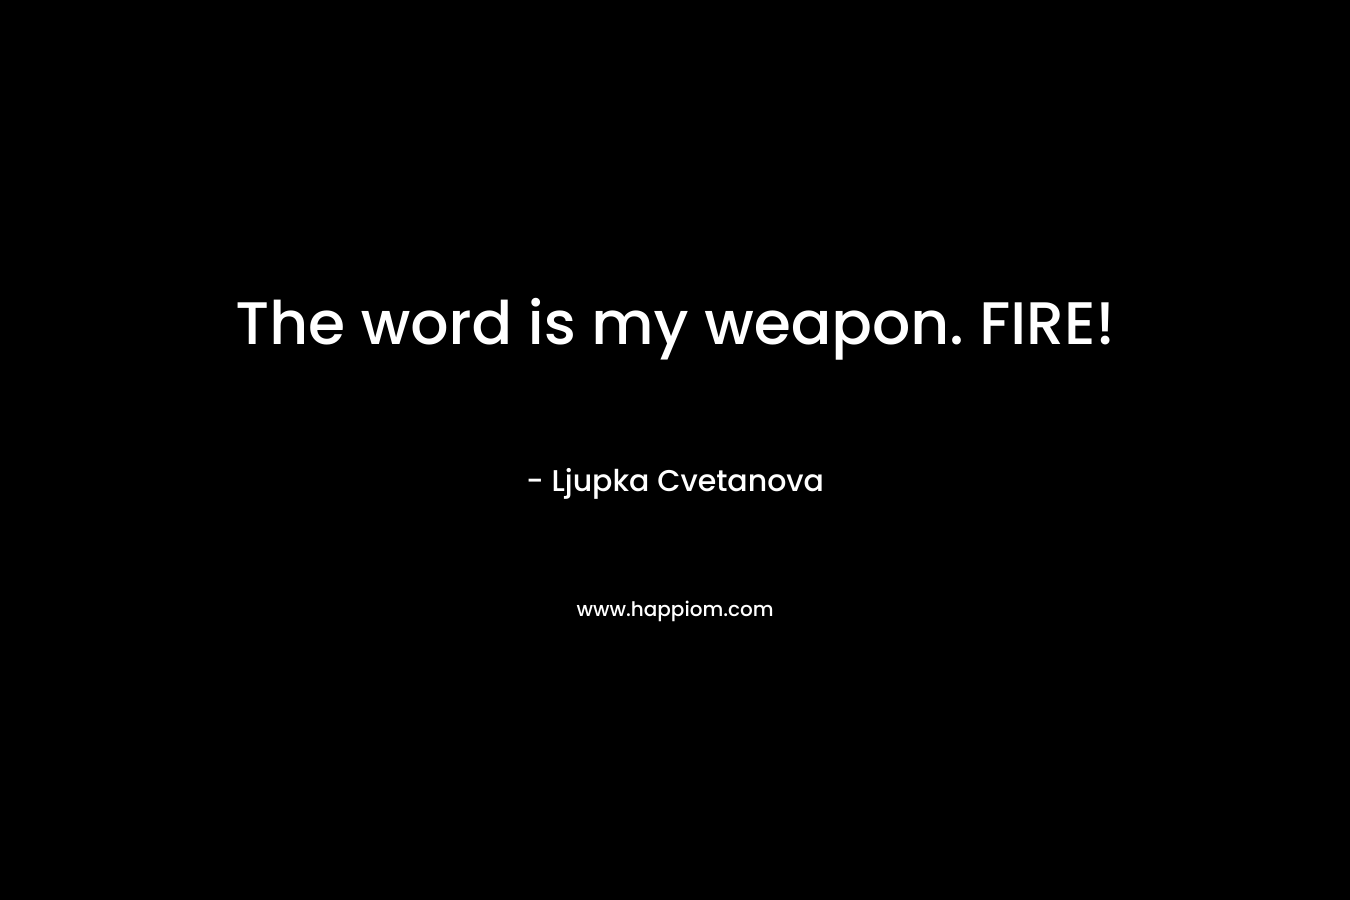 The word is my weapon. FIRE!